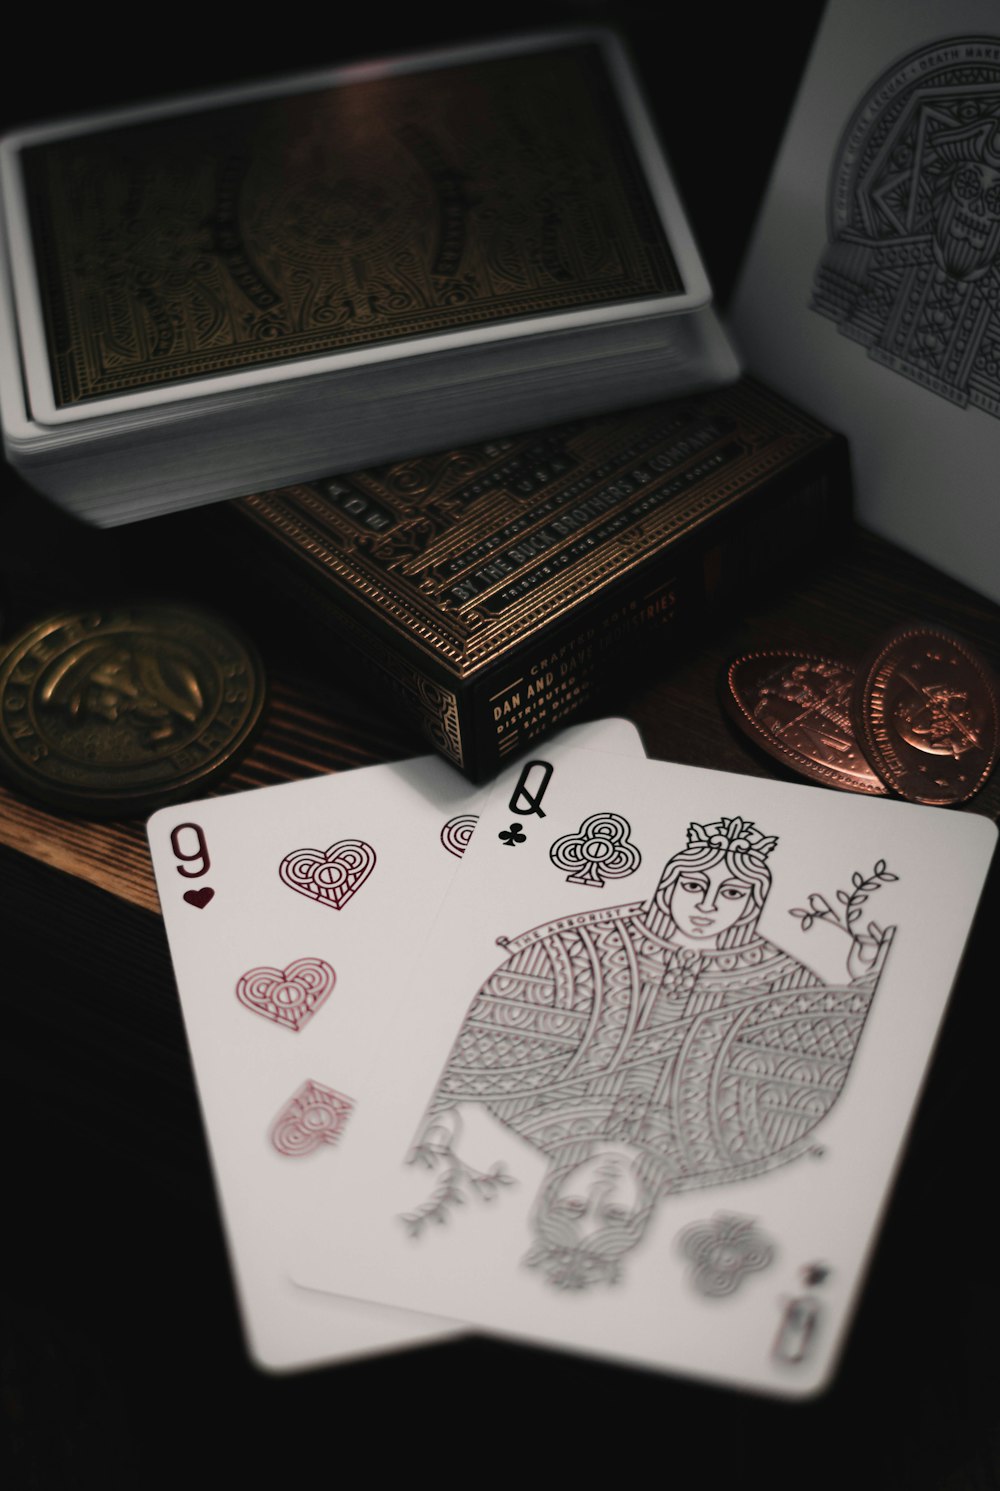 9 of hearts and Queen of clubs playing cards